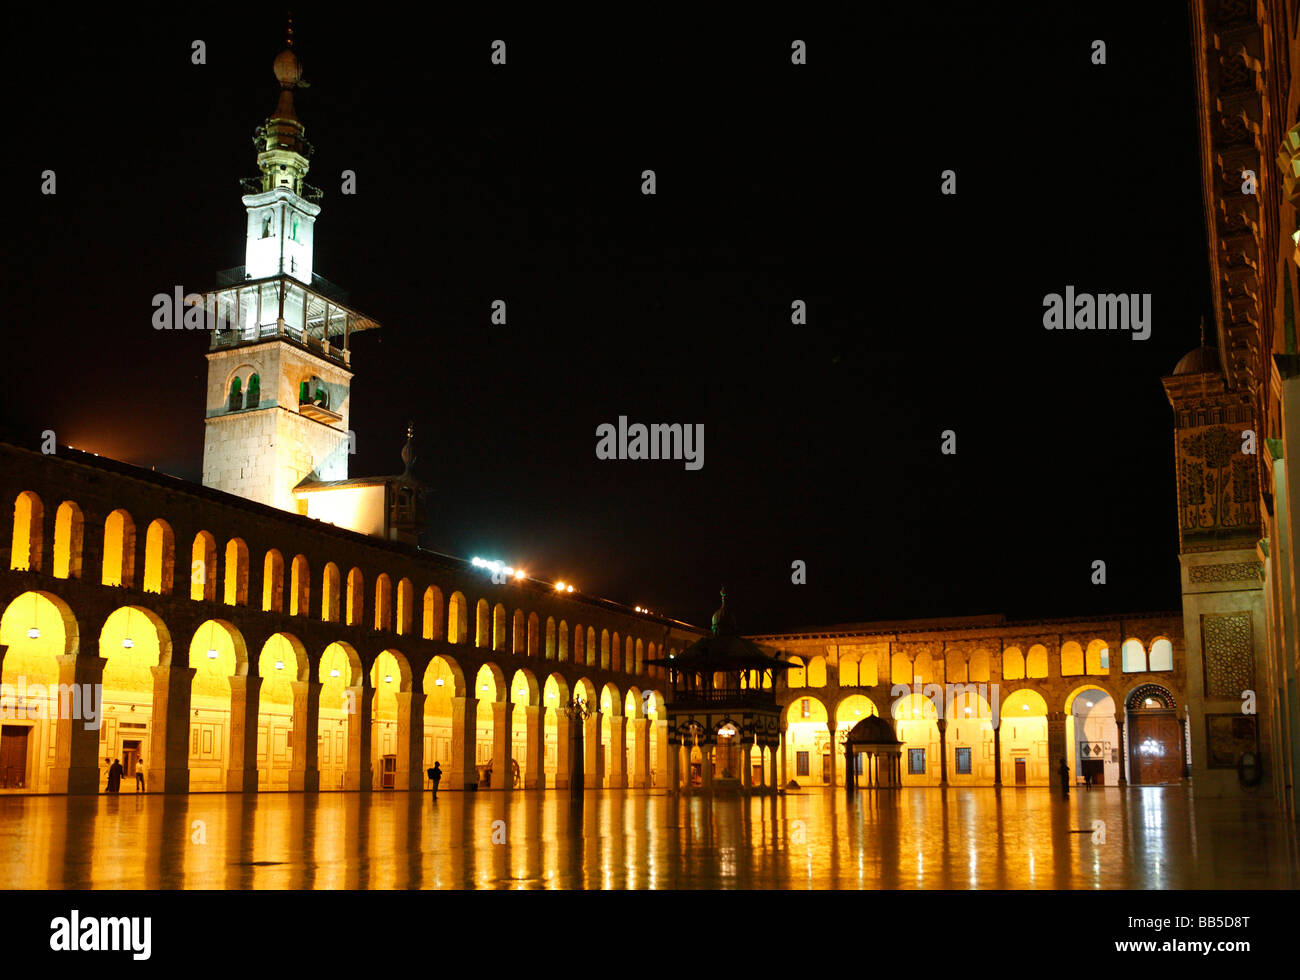 The Courtyard of the Great Umayyad Mosque at night, Damascus Stock Photo